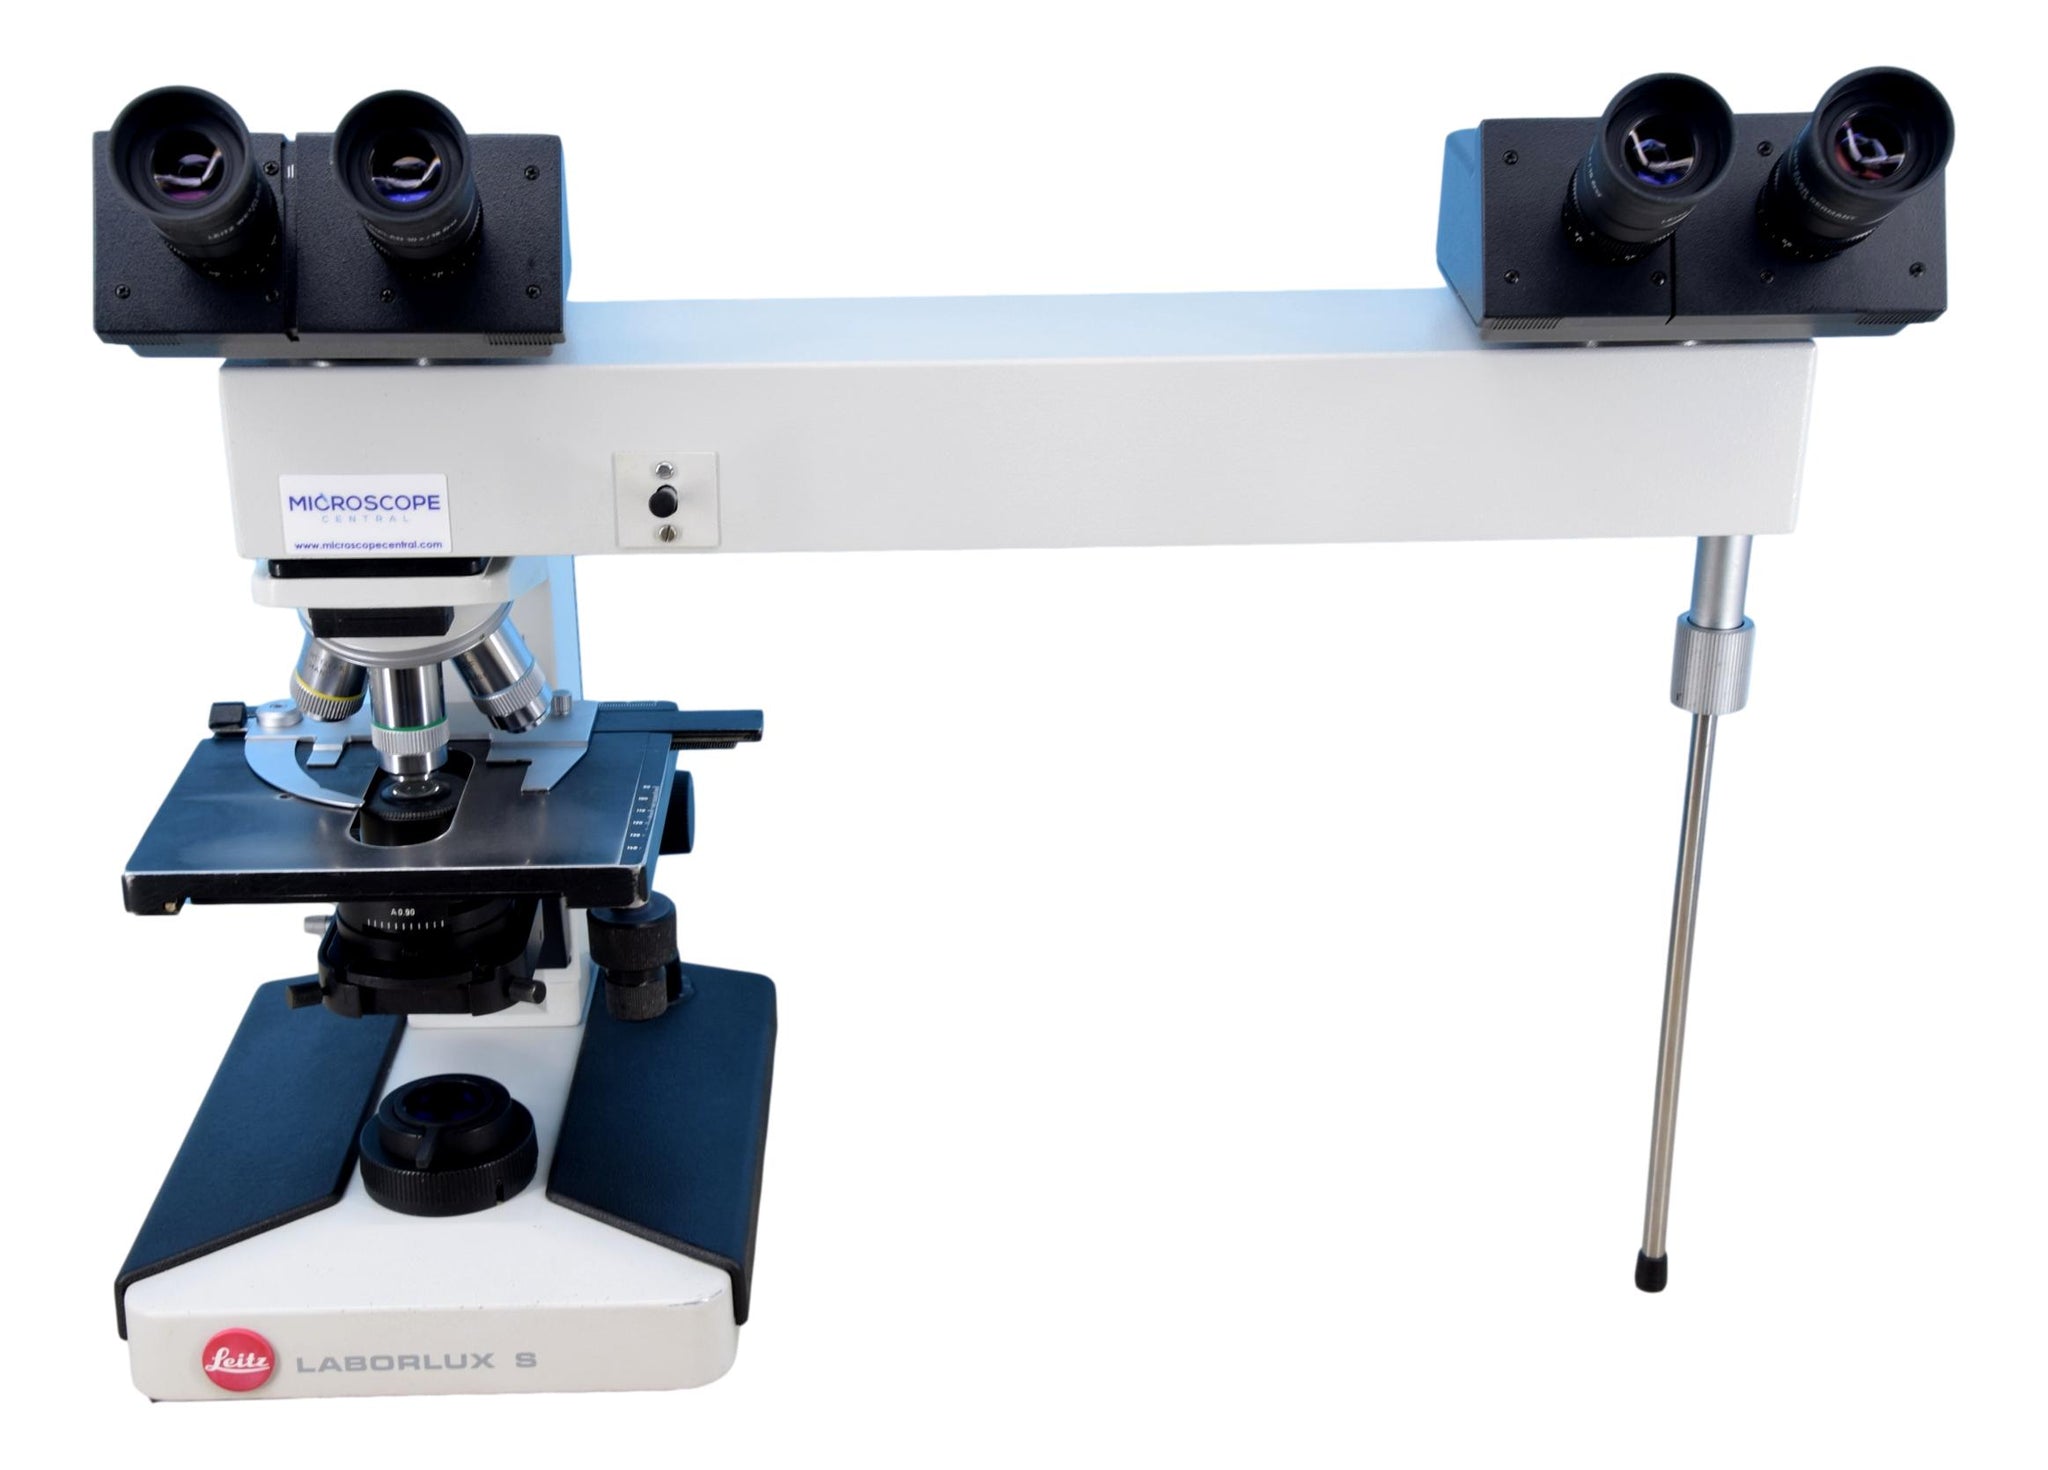 Leitz Laborlux S Dual Viewing Microscope